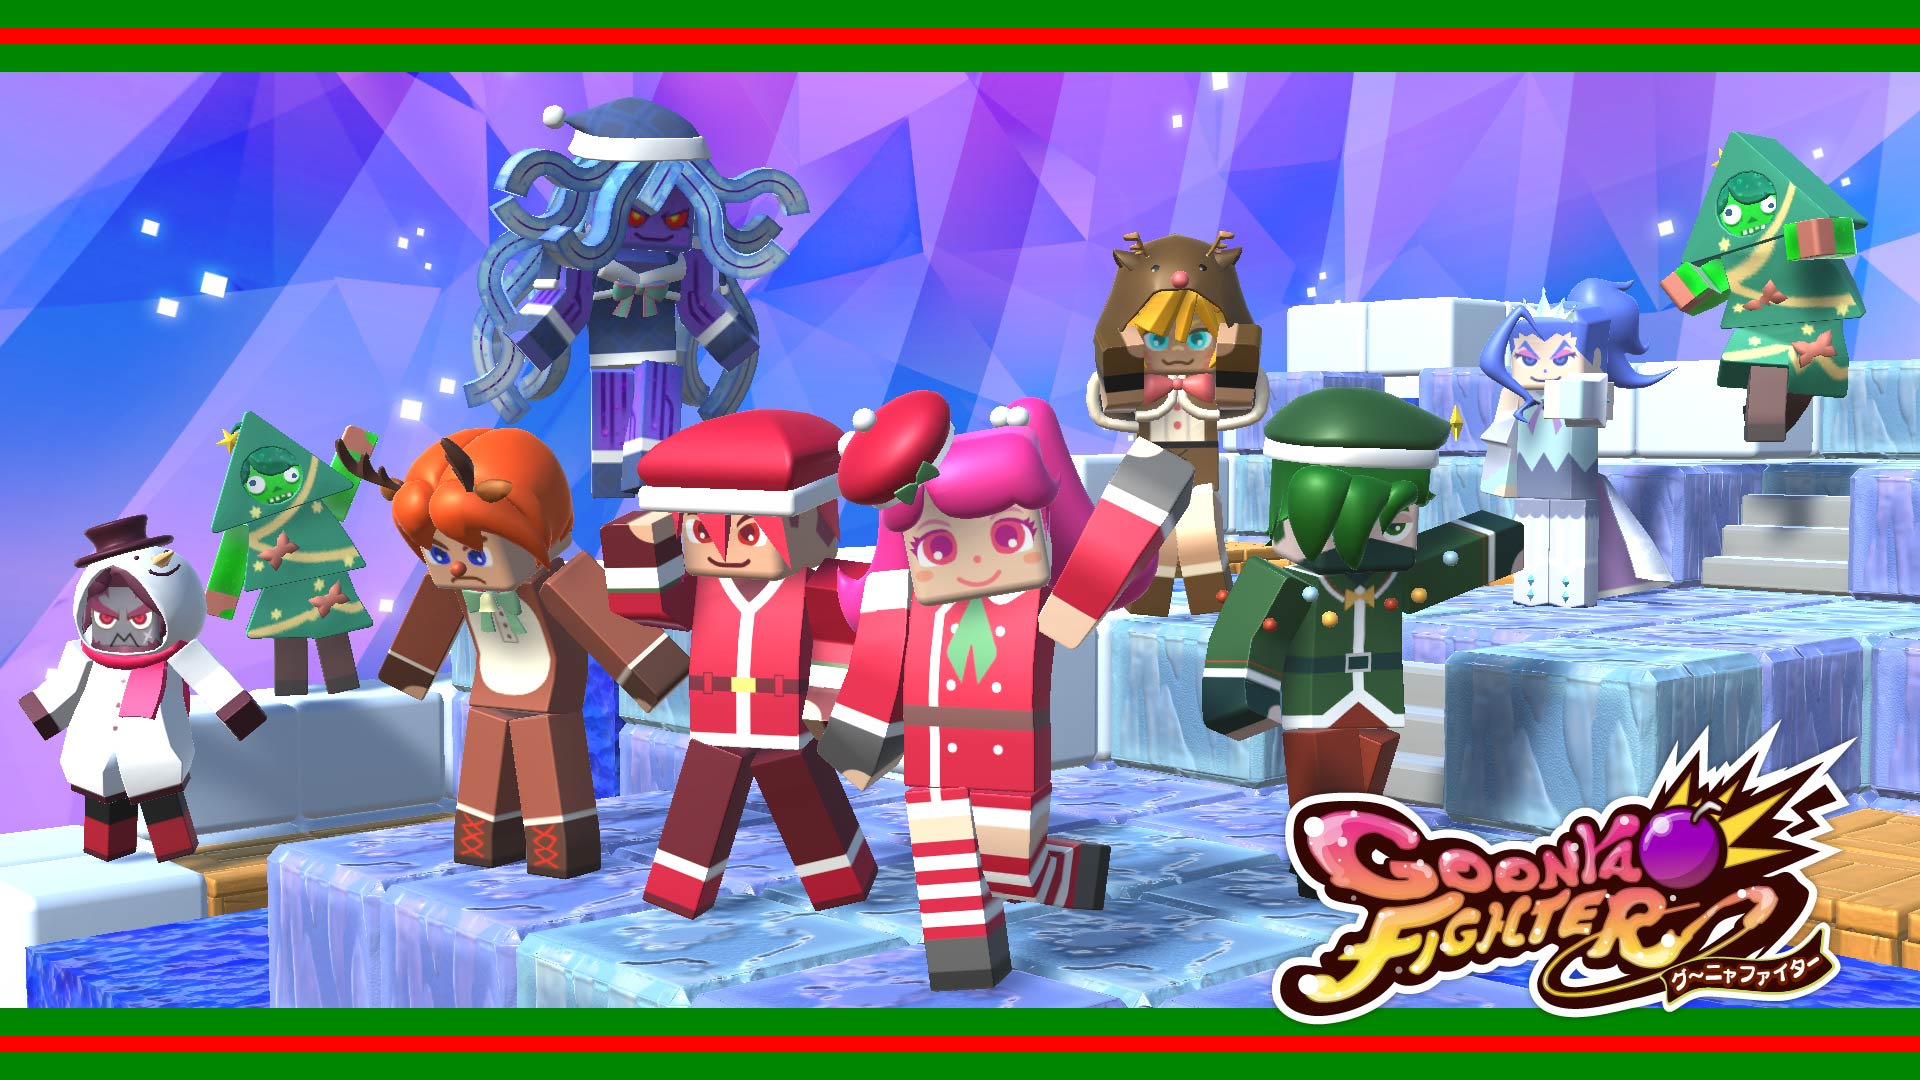 Additional skin: All character skins (Xmas ver.)